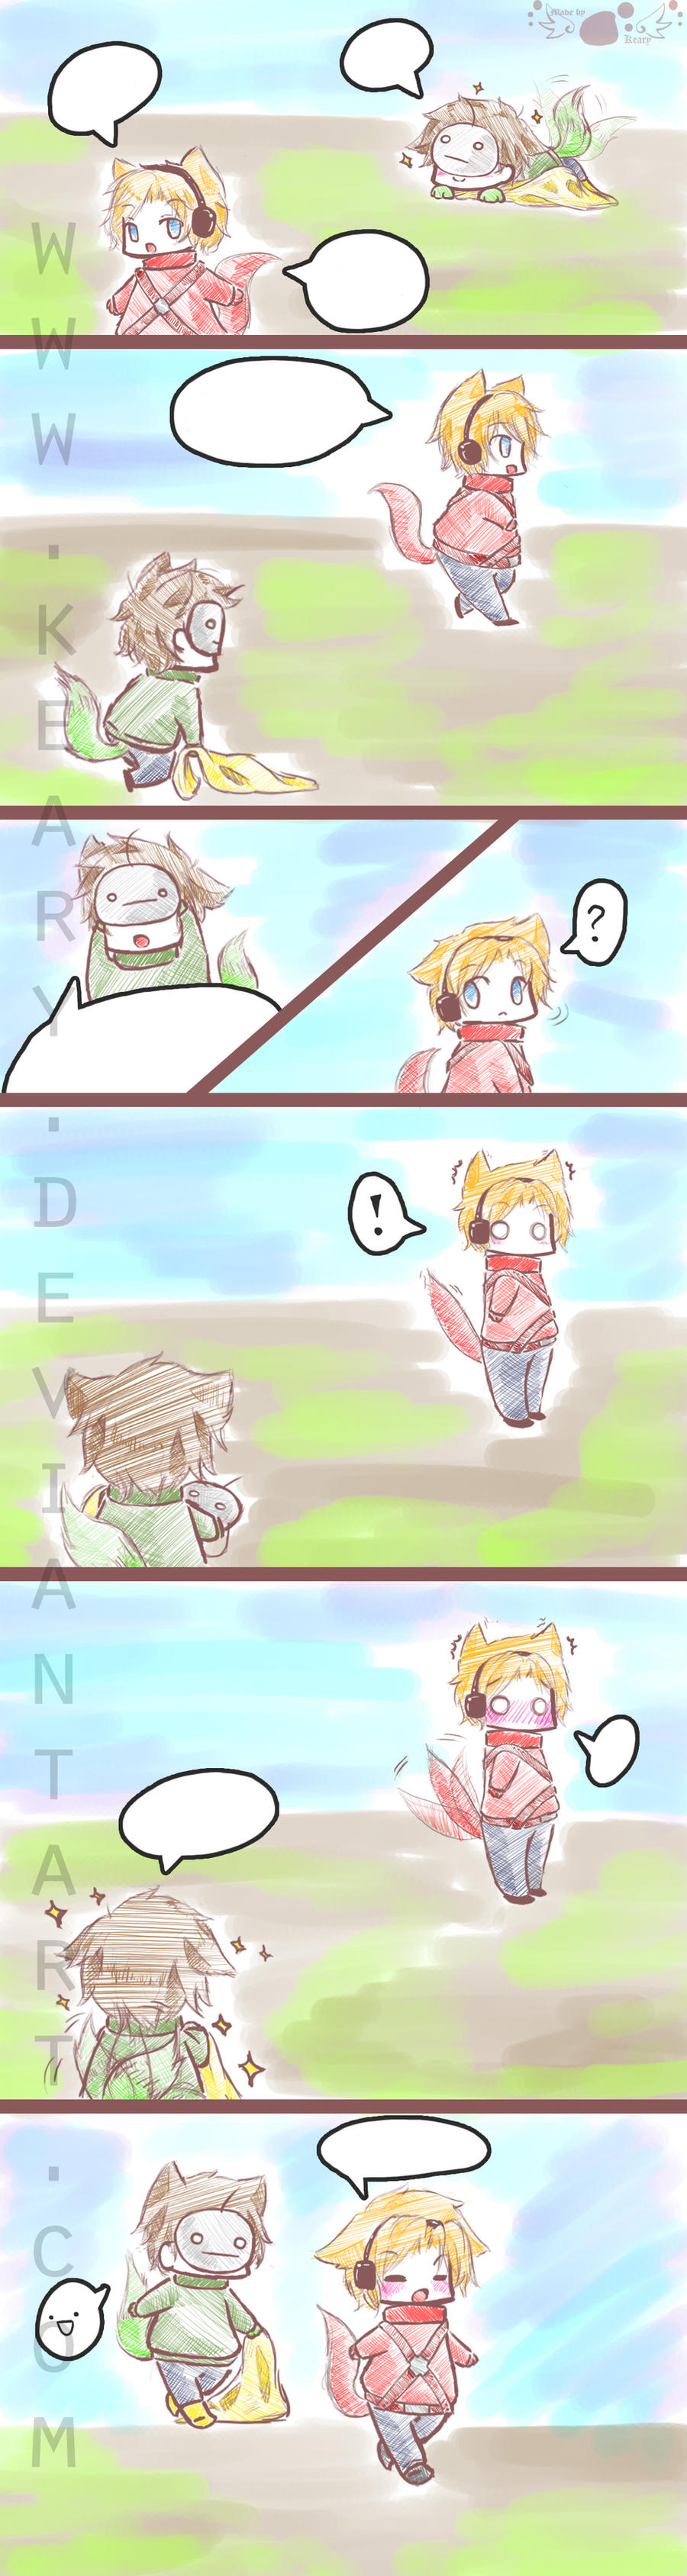 pewdiecry Bloody Trapland comic